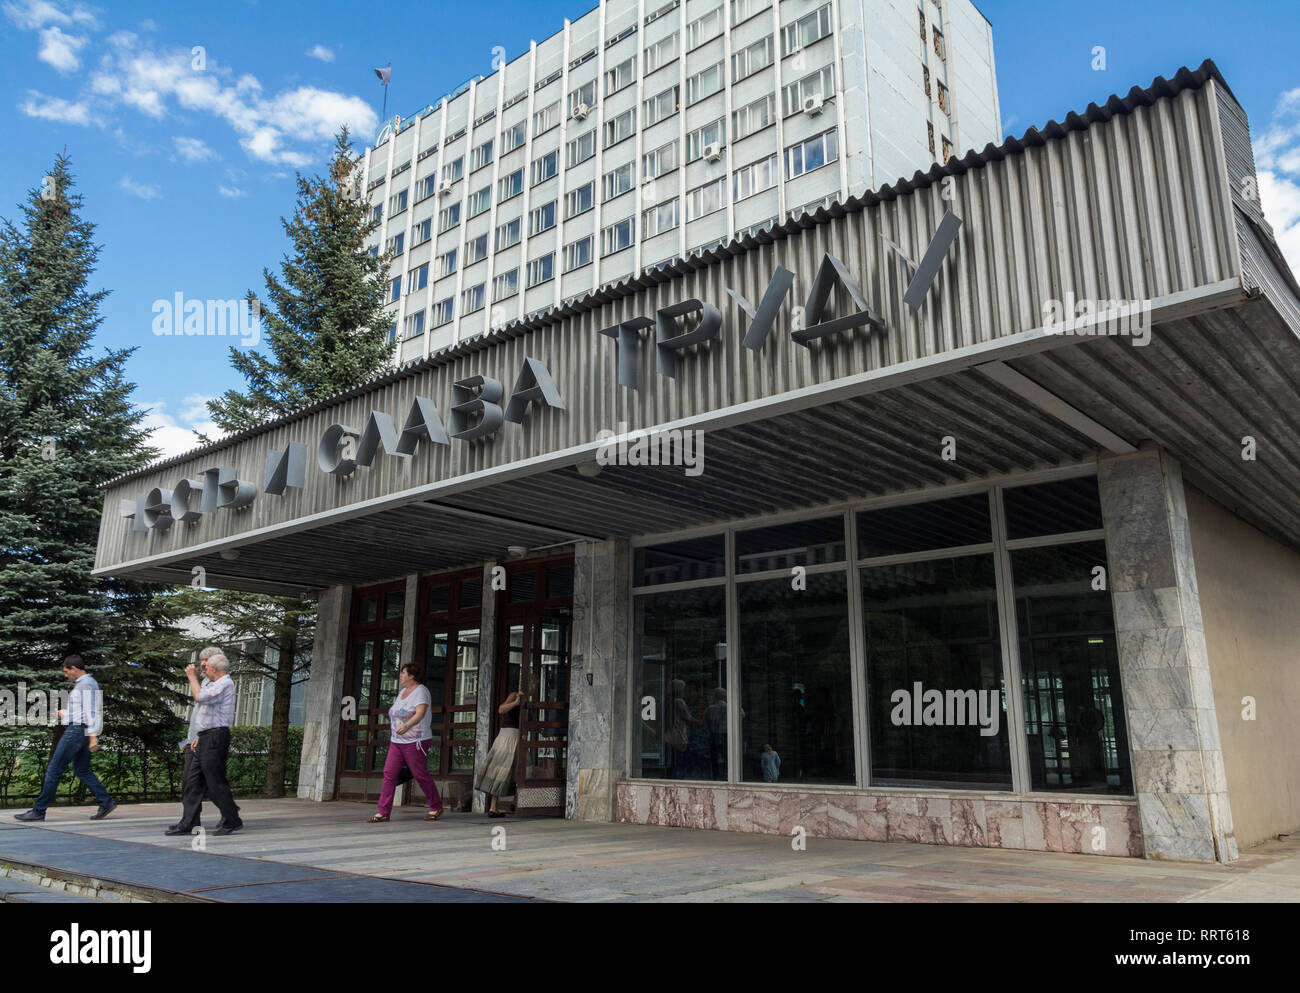 Dubna, Russia - Jul 21, 2014: Entrance of the Tensor factory with soviet slogan (Honor and glory to labor). Stock Photo